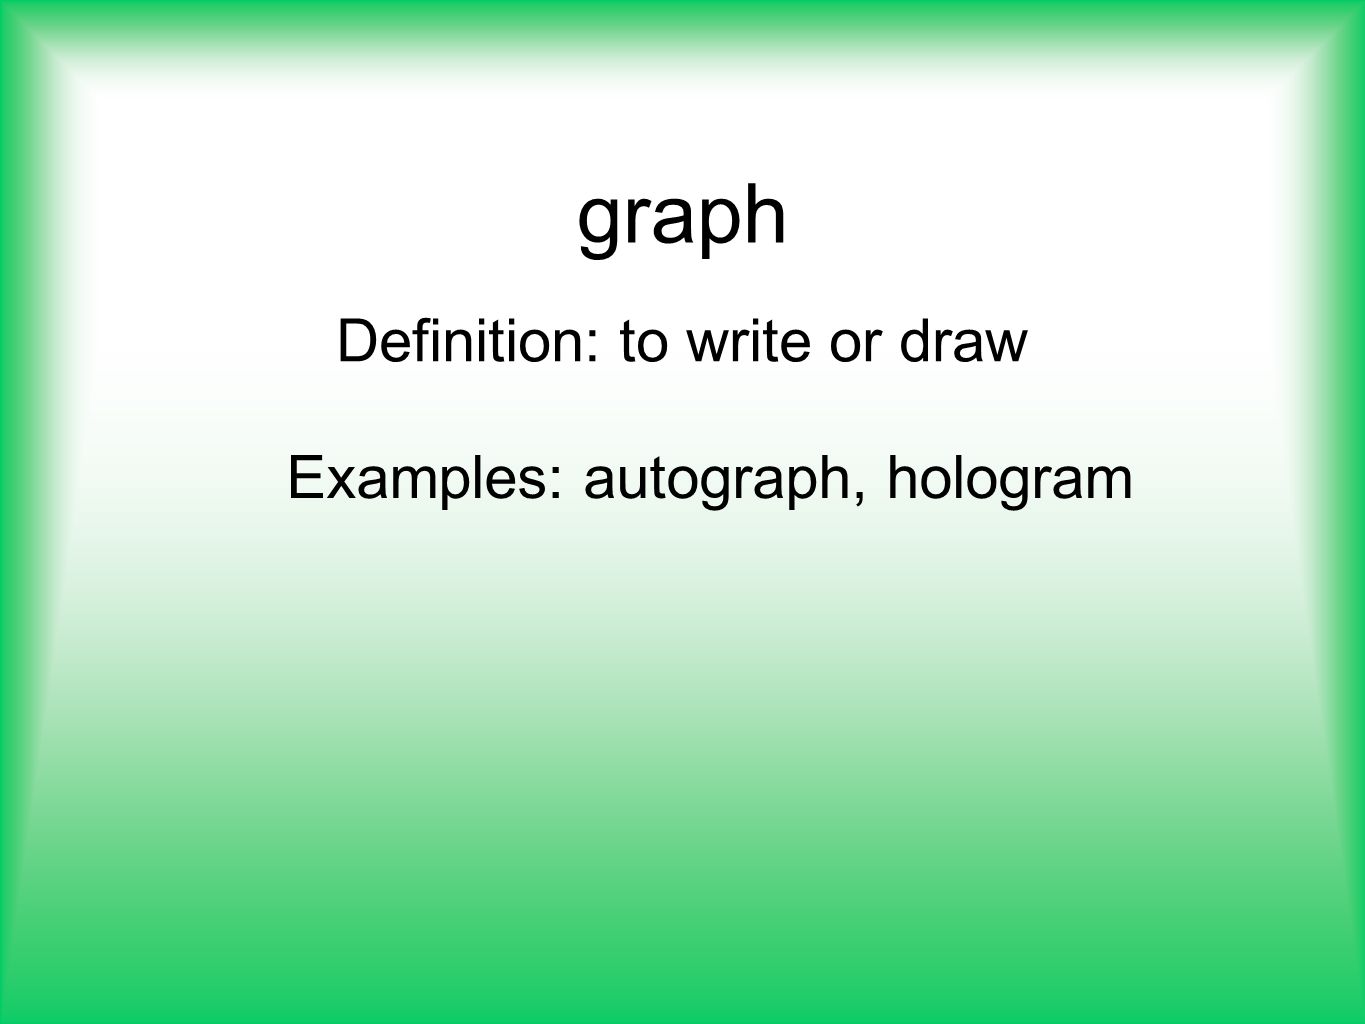 Definition: to write or draw